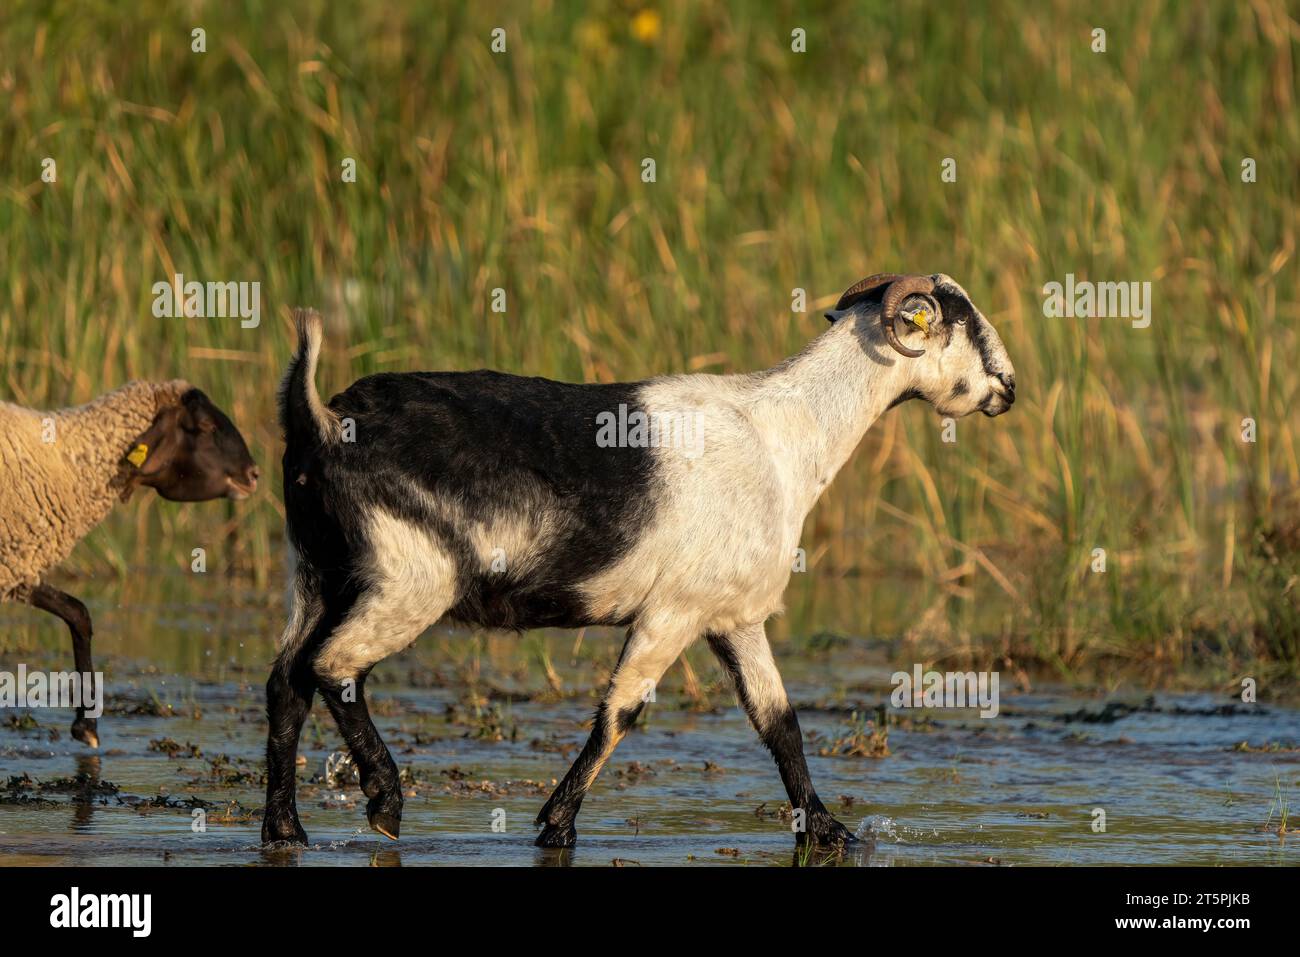 Goats grazing by the stream. Sheep and goats walking in the water in Turkey Stock Photo